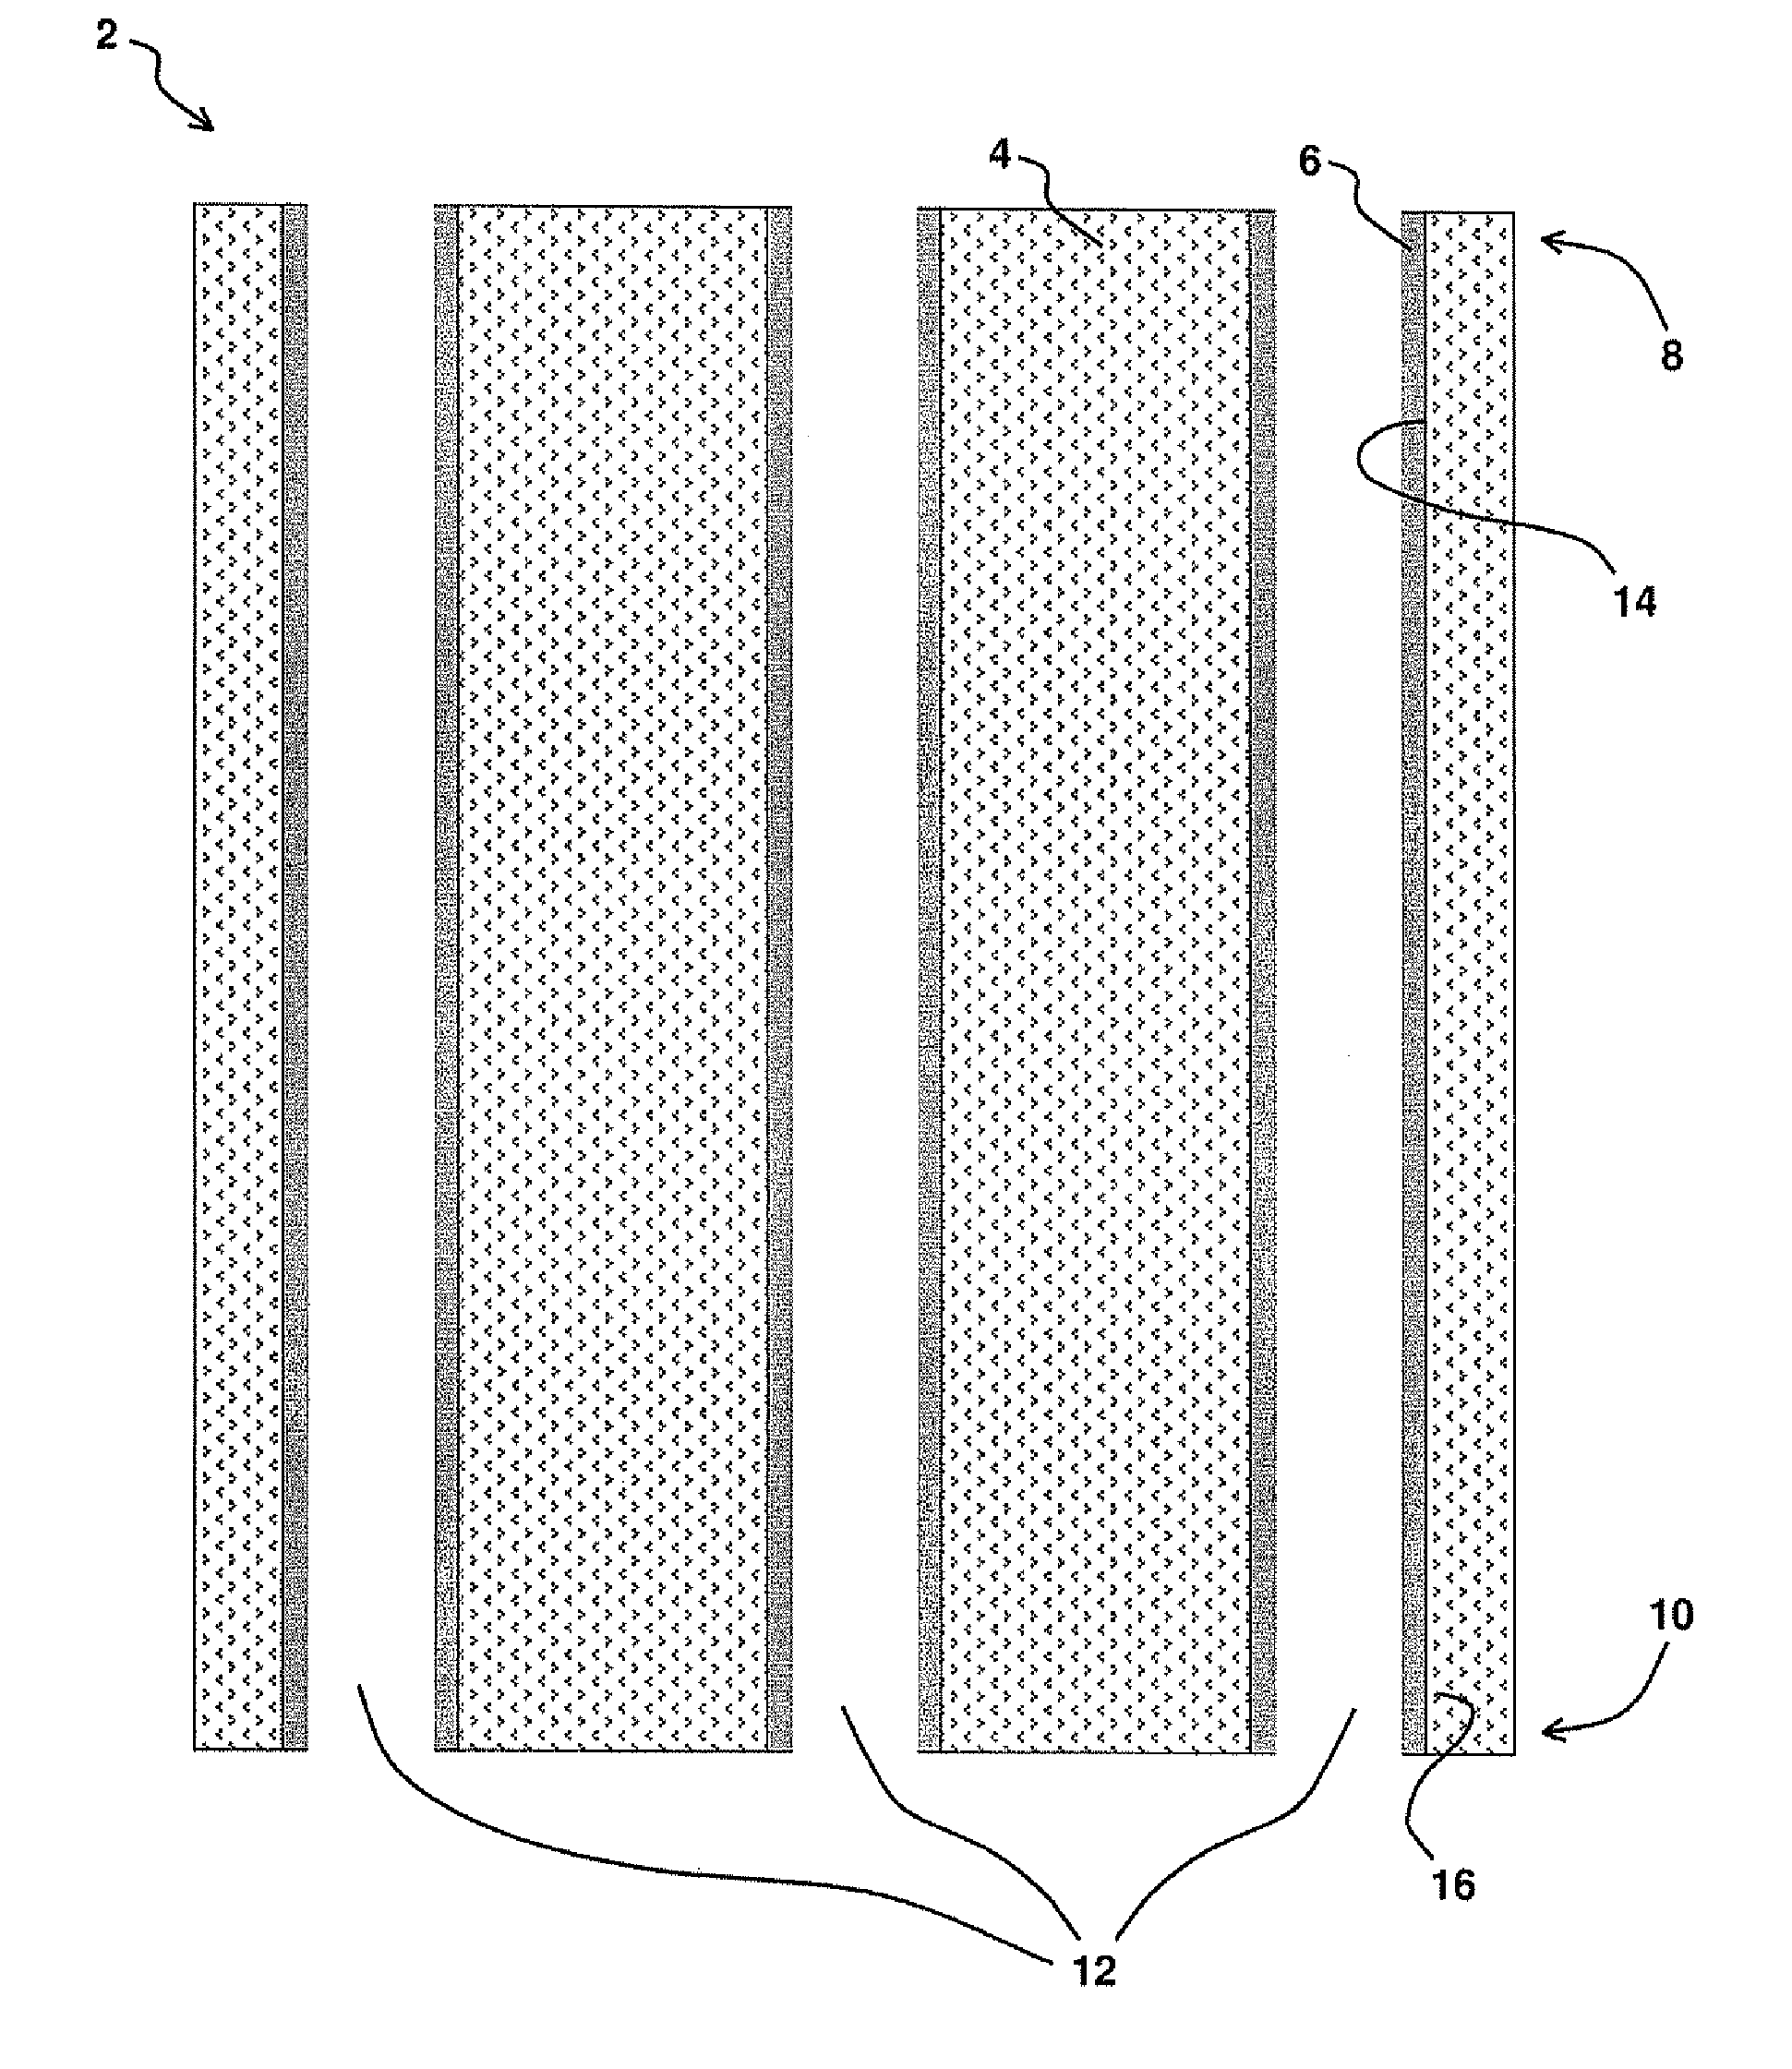 Polymer Hybrid Membrane Structures